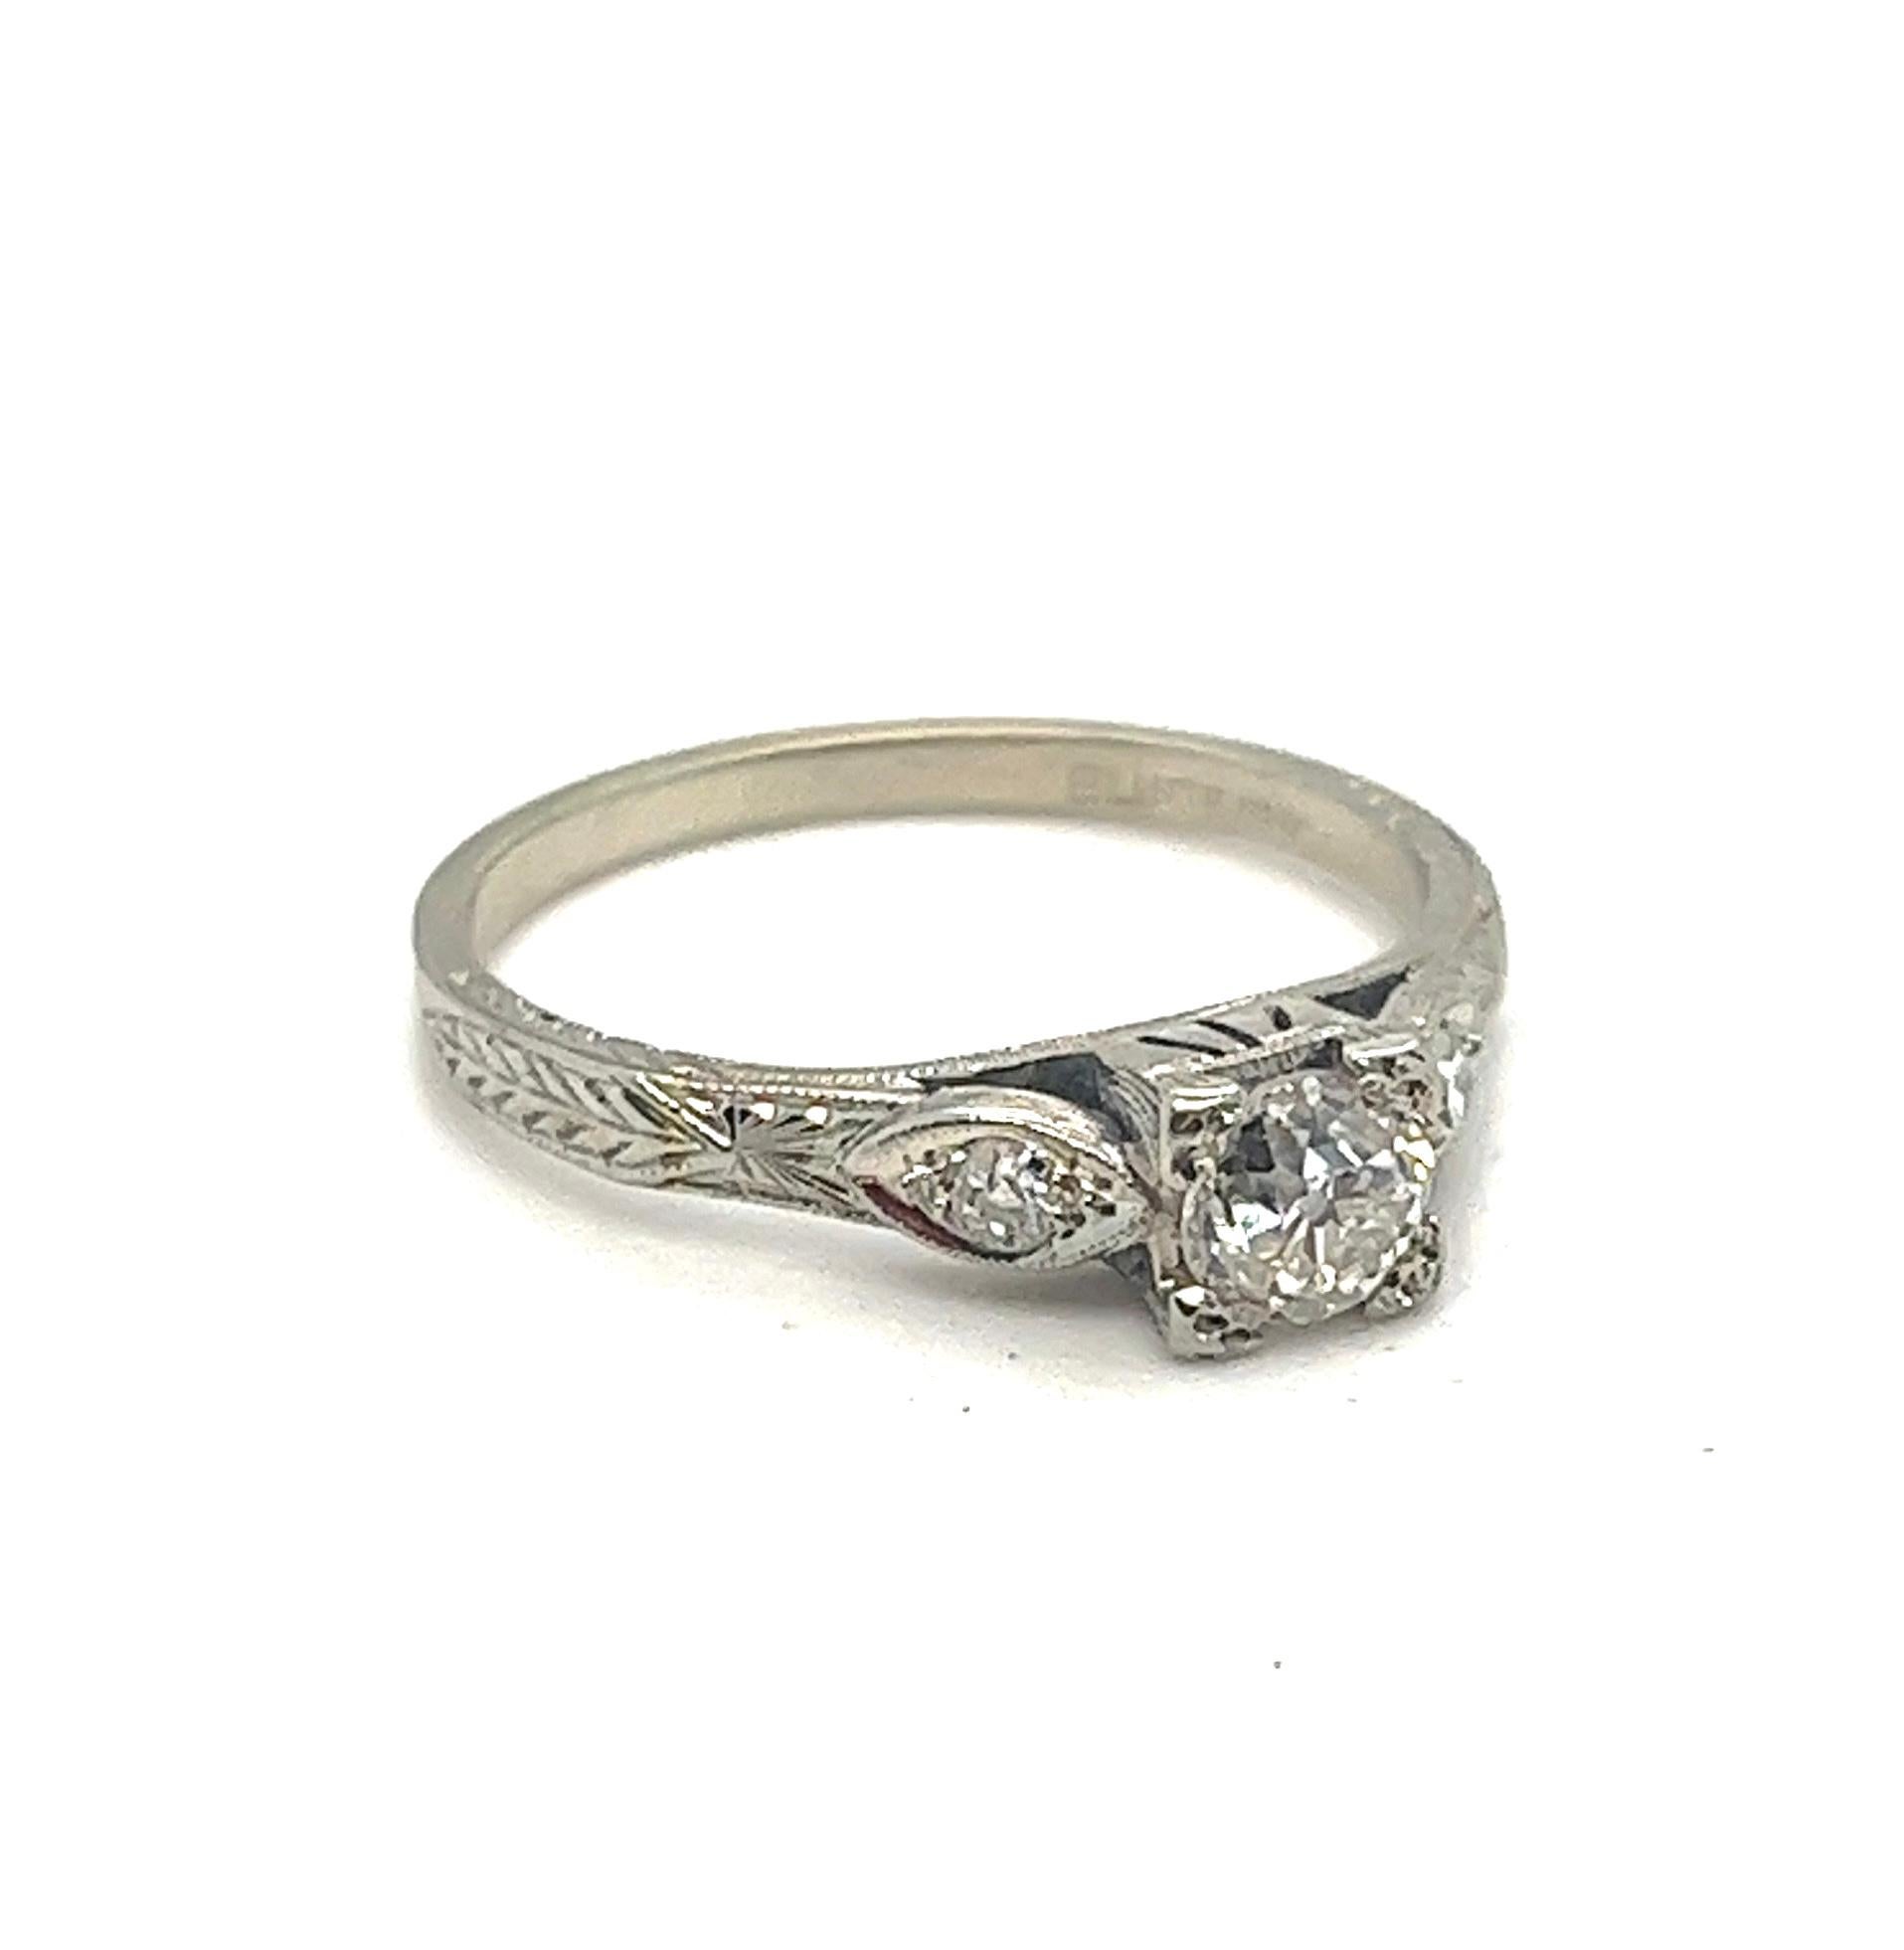 Elegant Art Deco Engagement Ring Set with Old European Cut Diamonds

Celebrate your love story with a touch of vintage elegance through this exquisite Art Deco engagement ring set. Crafted in solid 18karat white gold, this set is a true embodiment